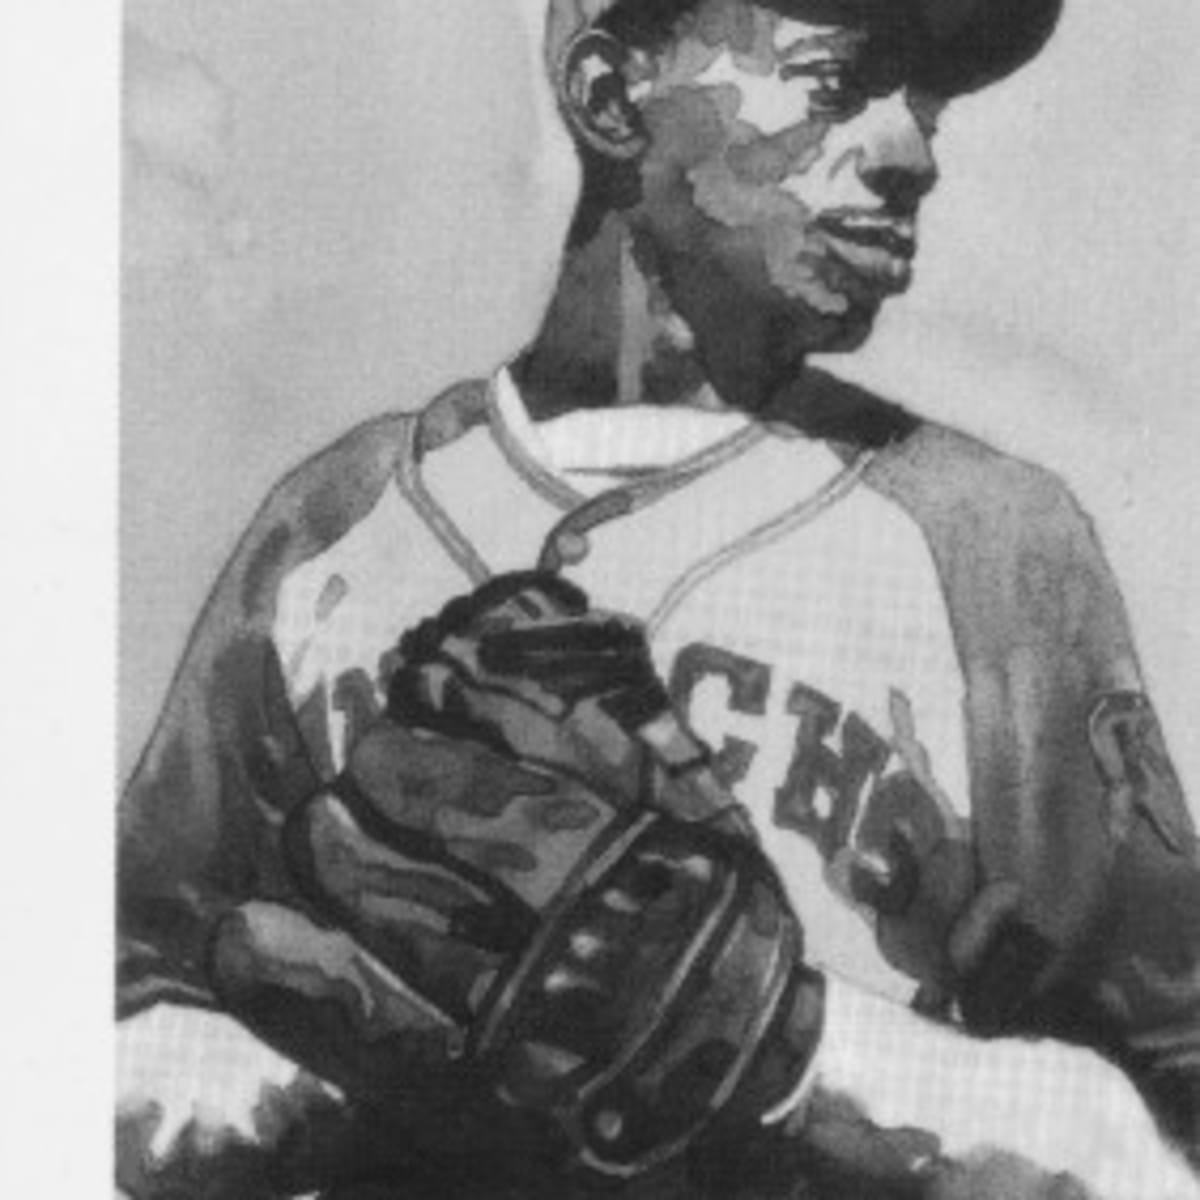 Satchel Paige, the ageless right-handed pitching star, signs the